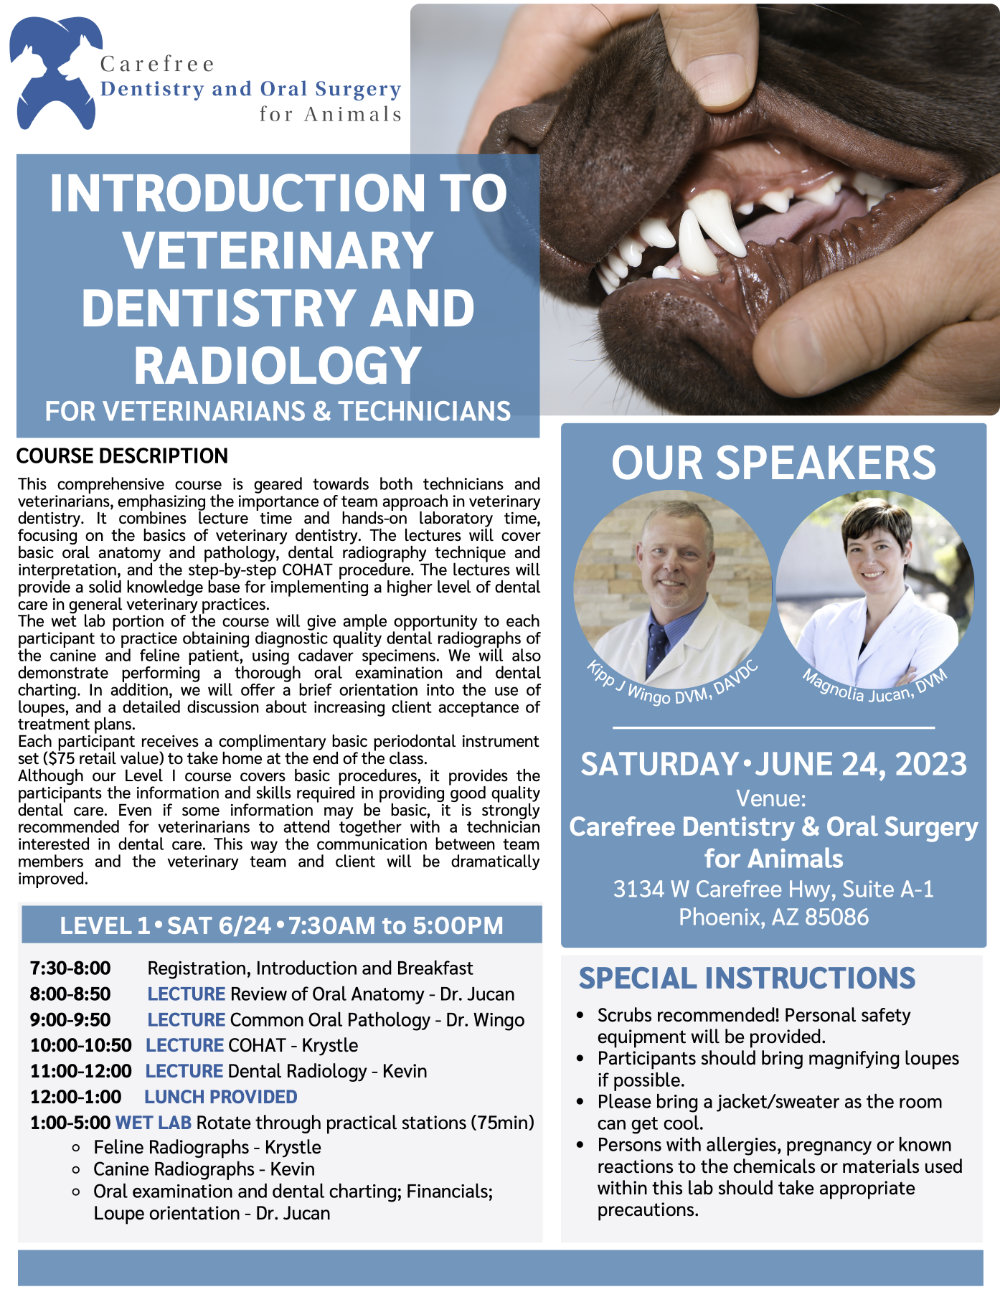 Level I- Introduction to Veterinary Dentistry and Radiology